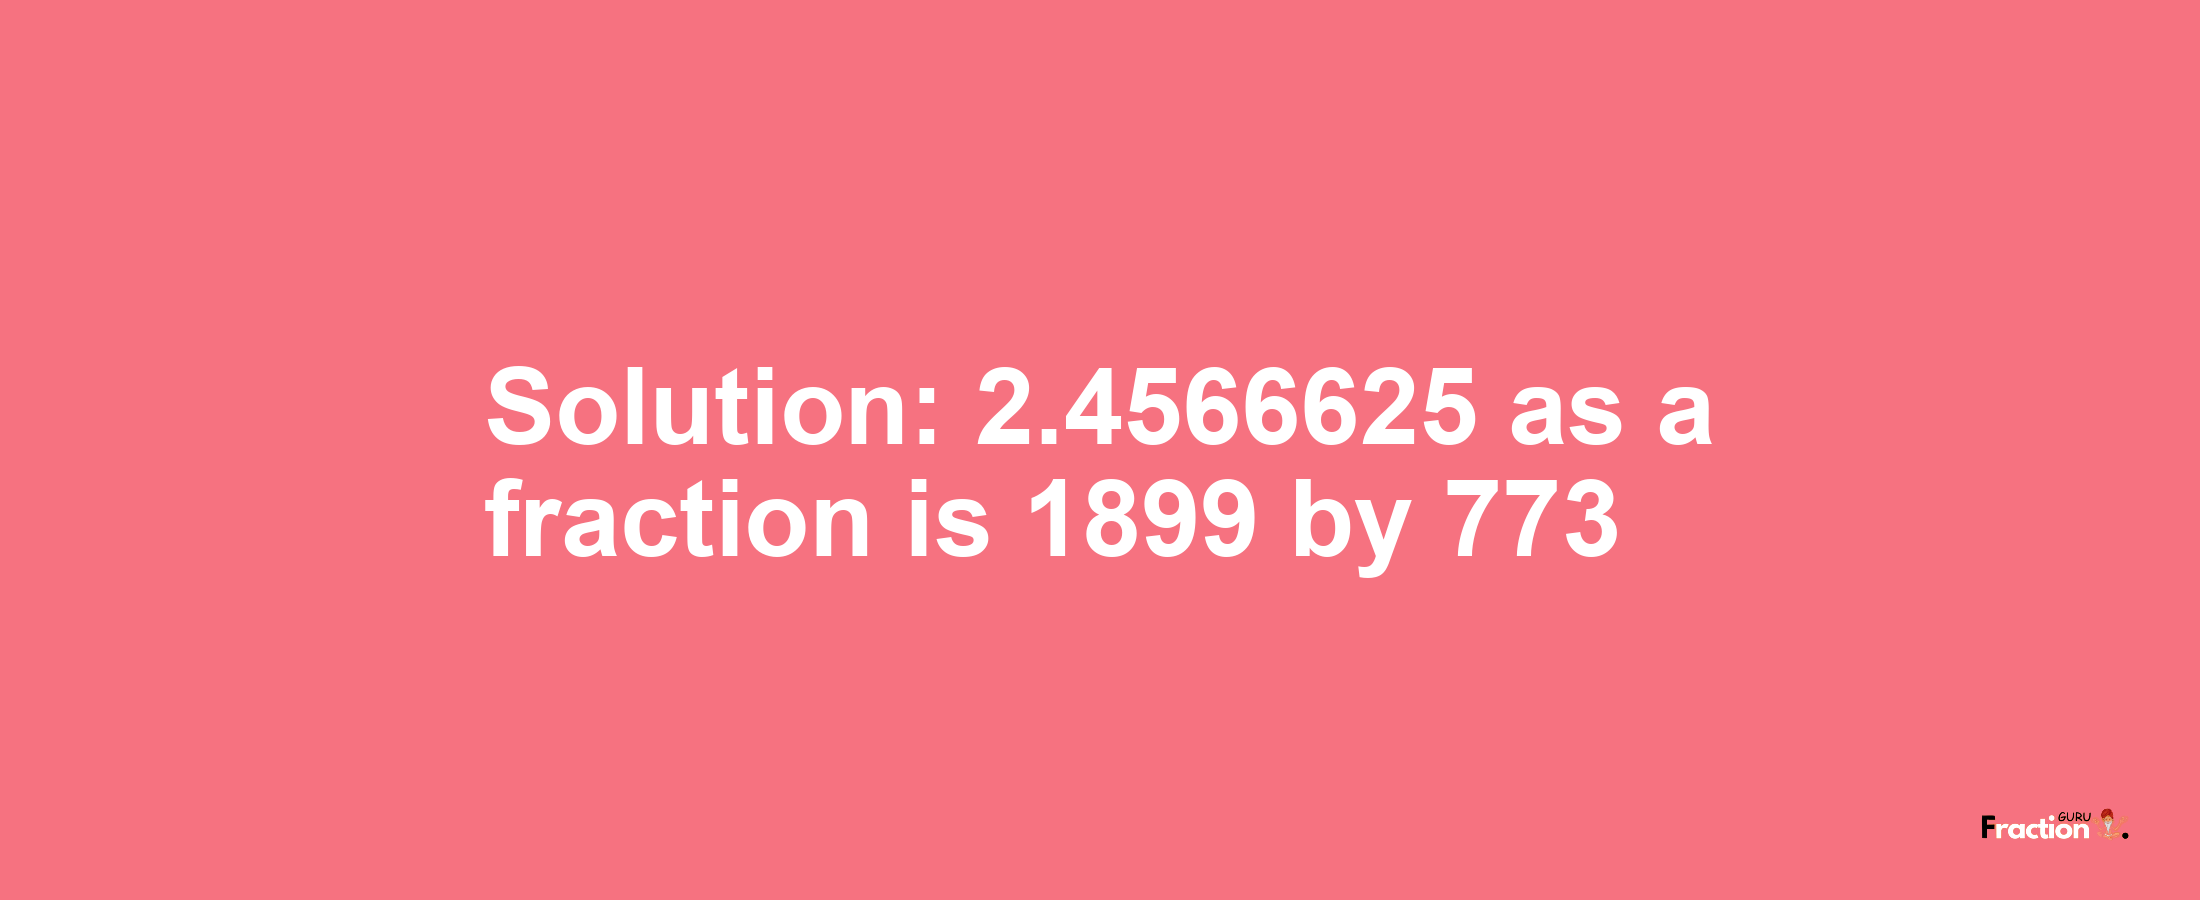 Solution:2.4566625 as a fraction is 1899/773